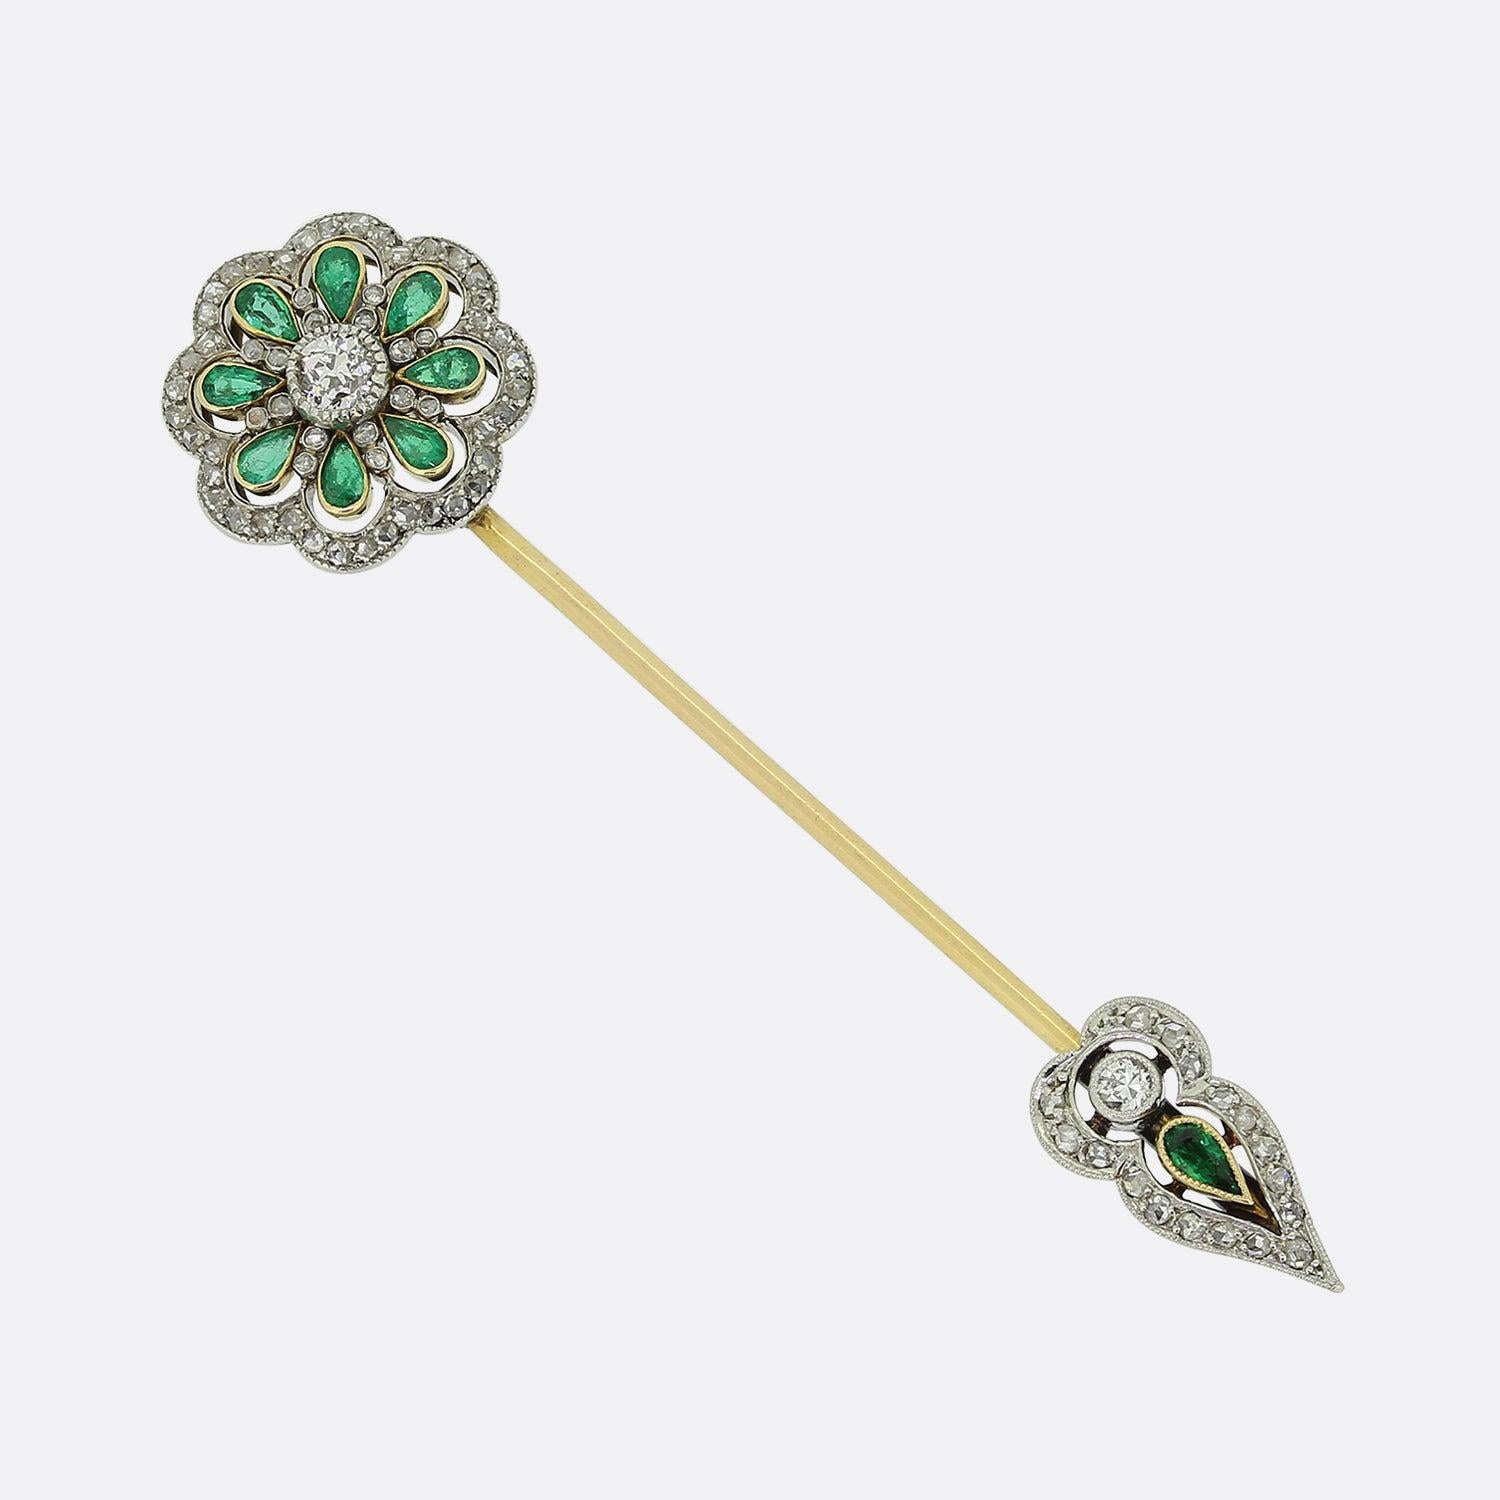 Here we have an antique emerald and diamond jabot pin. This piece was crafted from 18ct yellow gold during the early stages of the 20th century with the head showcasing a single old cut diamond at the centre surrounded by a cluster of pear shaped